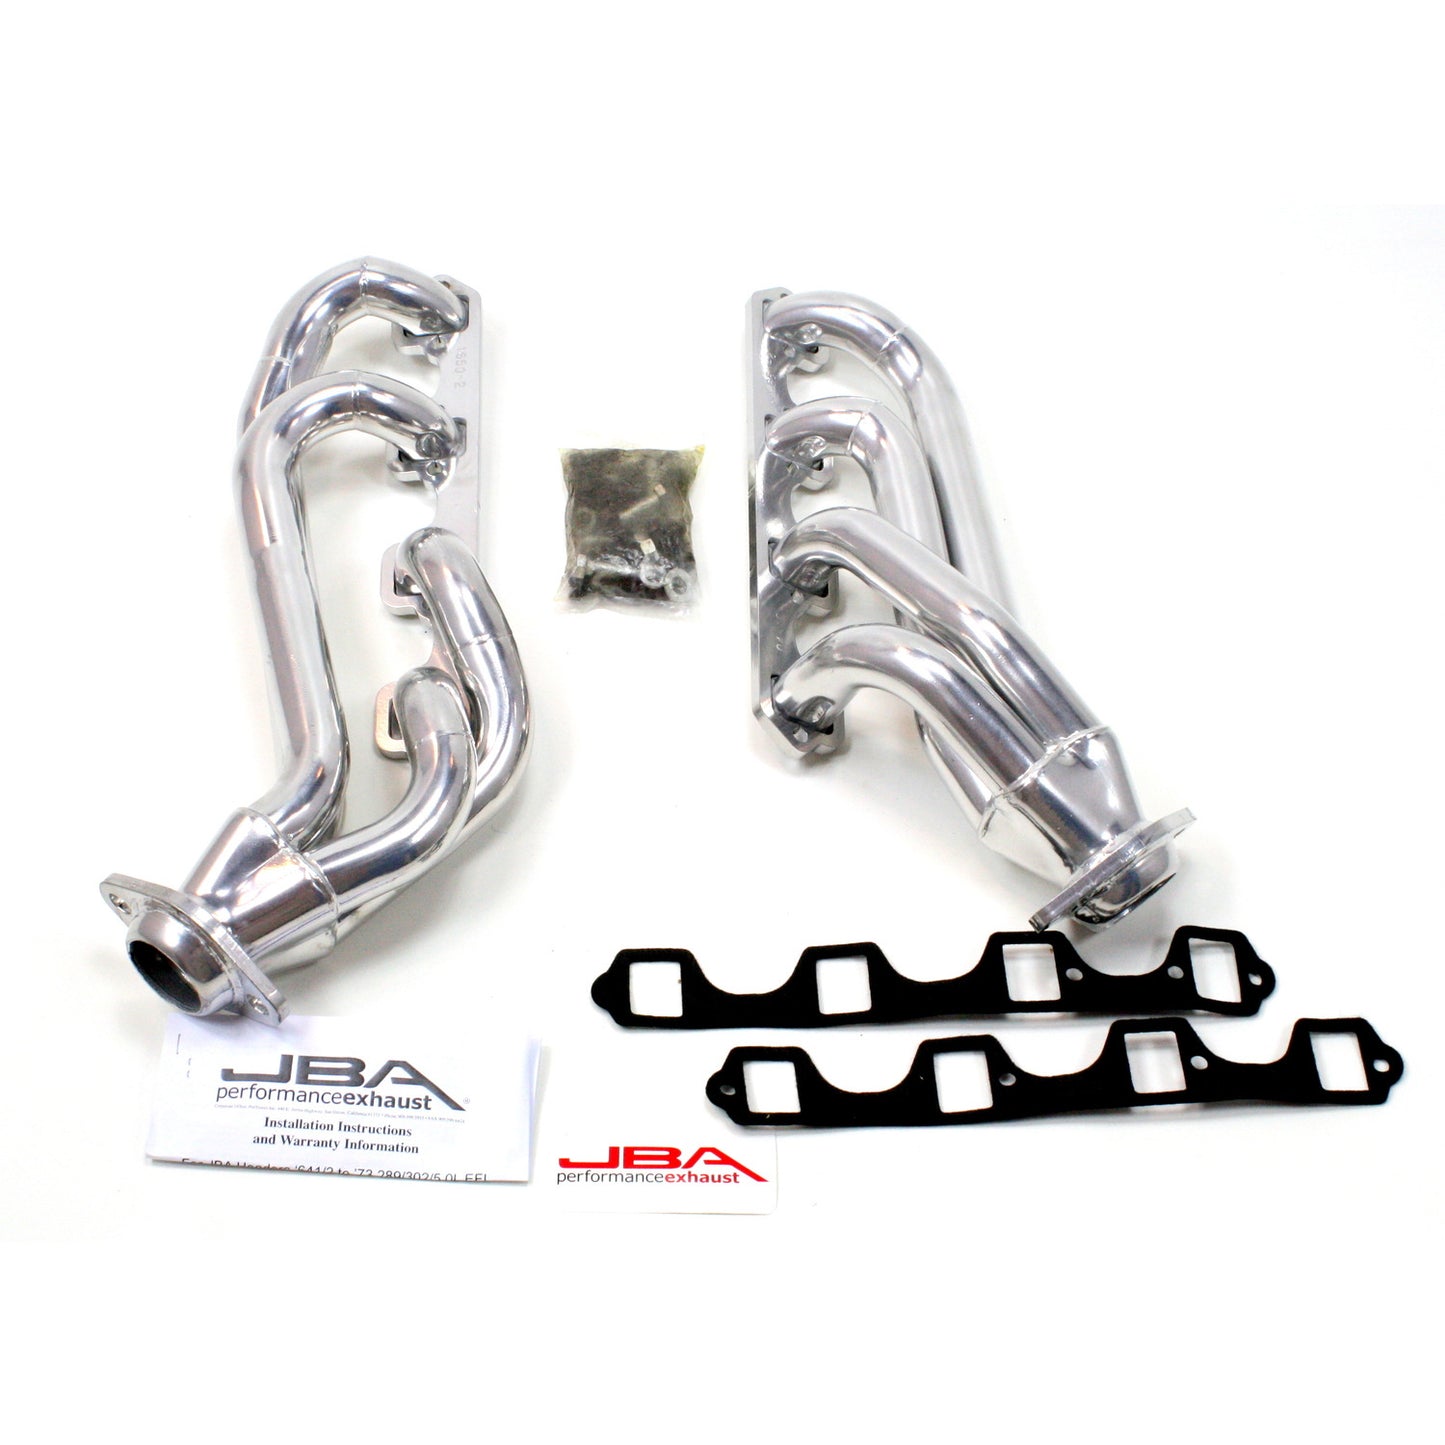 JBA Performance Exhaust 1650S-2JS 1 5/8" Header Shorty Stainless Steel 65-73 Mustang 289/302 with GT40 P Cylinder Head Silver Ceramic